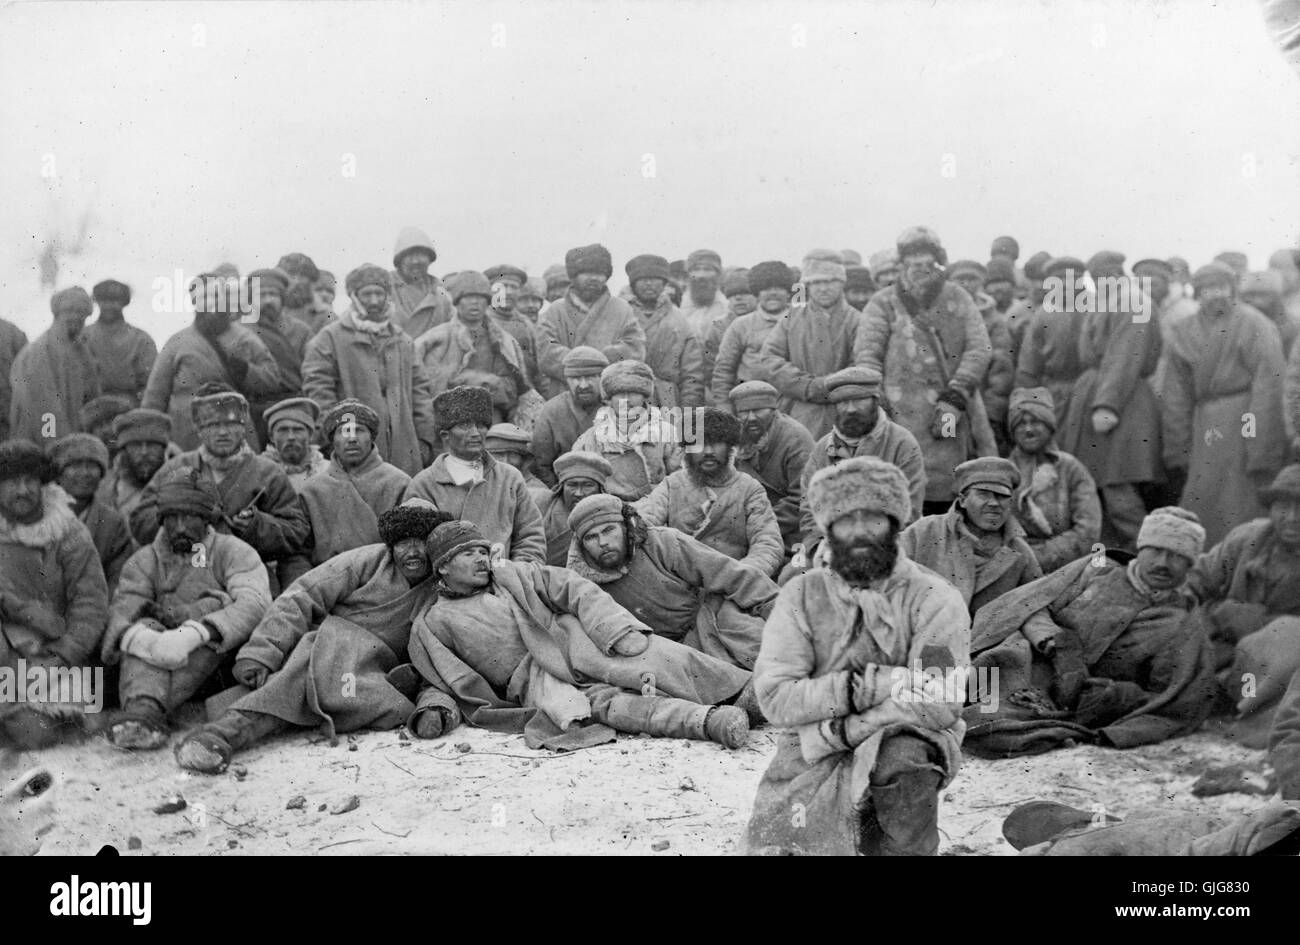 A group of hard-labor convicts in Siberia, Russia Stock Photo